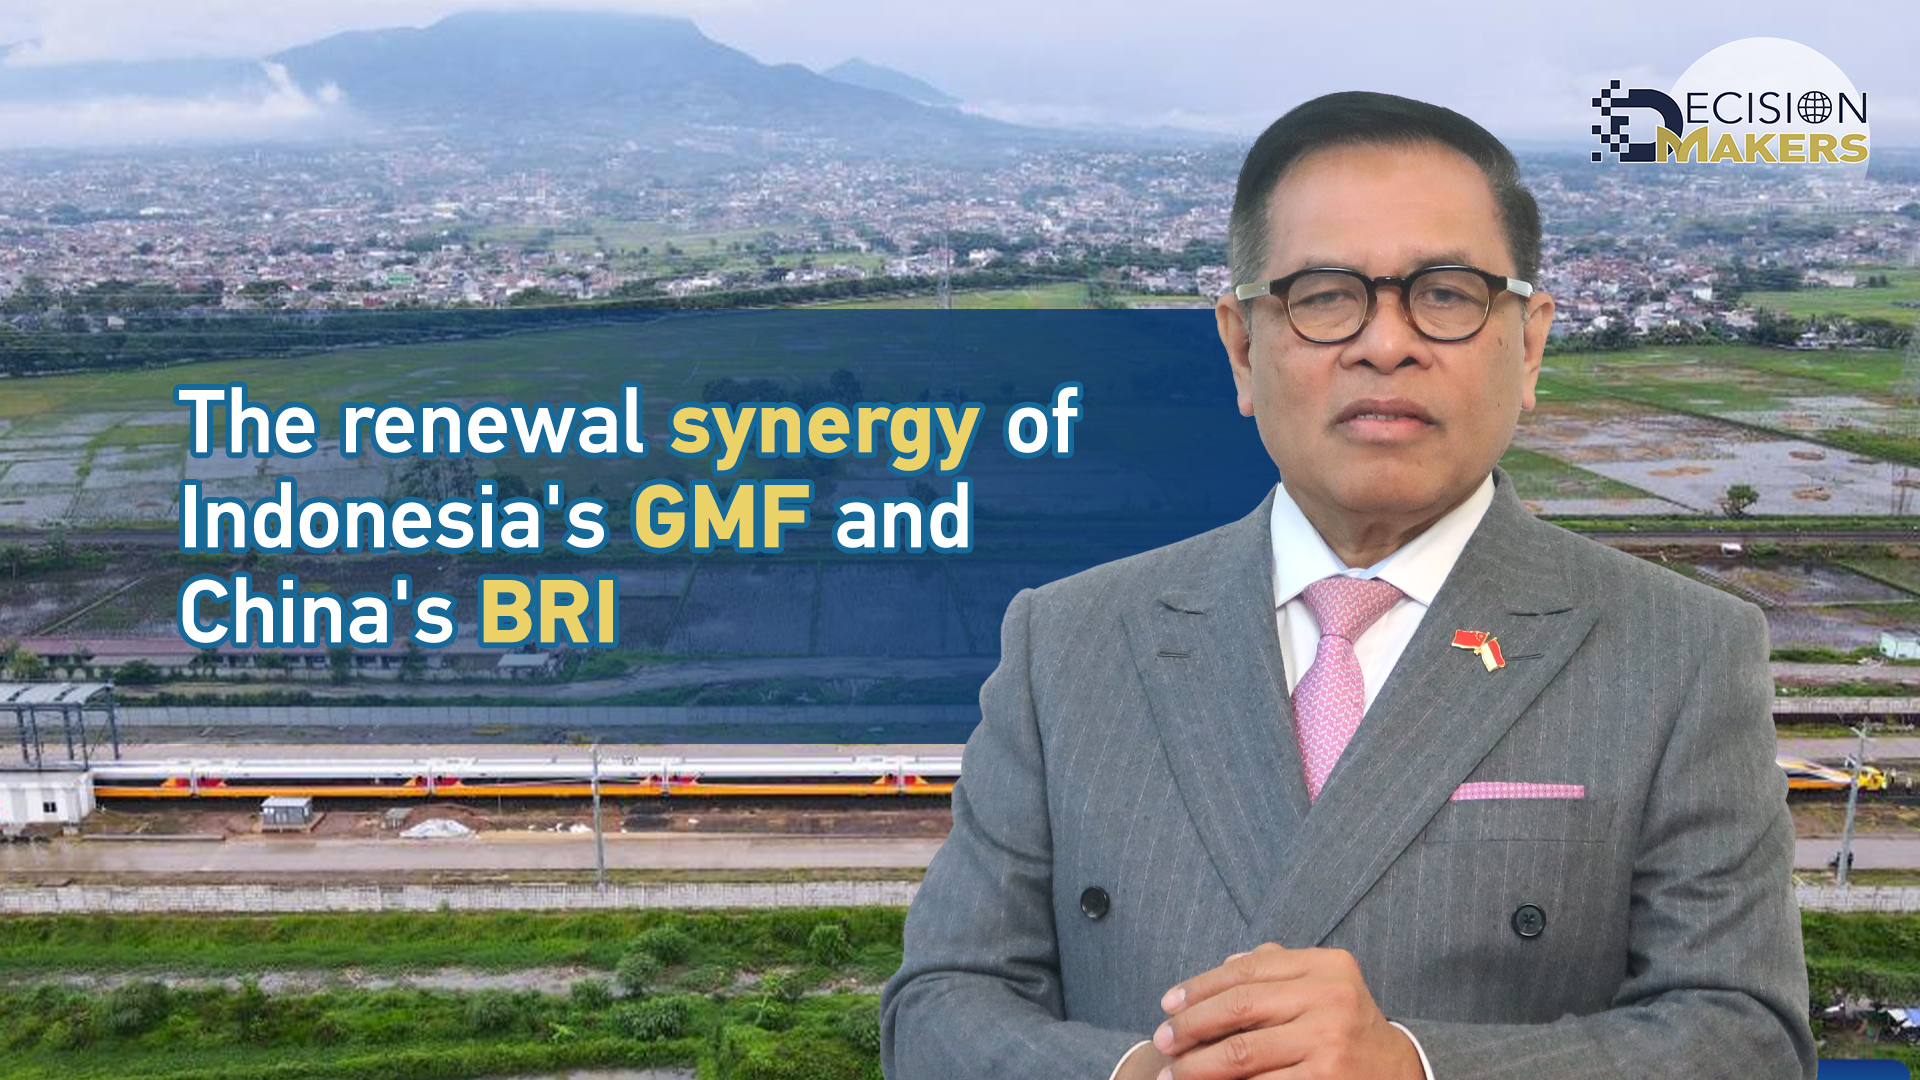 The renewal synergy of Indonesia's GMF and China's BRI